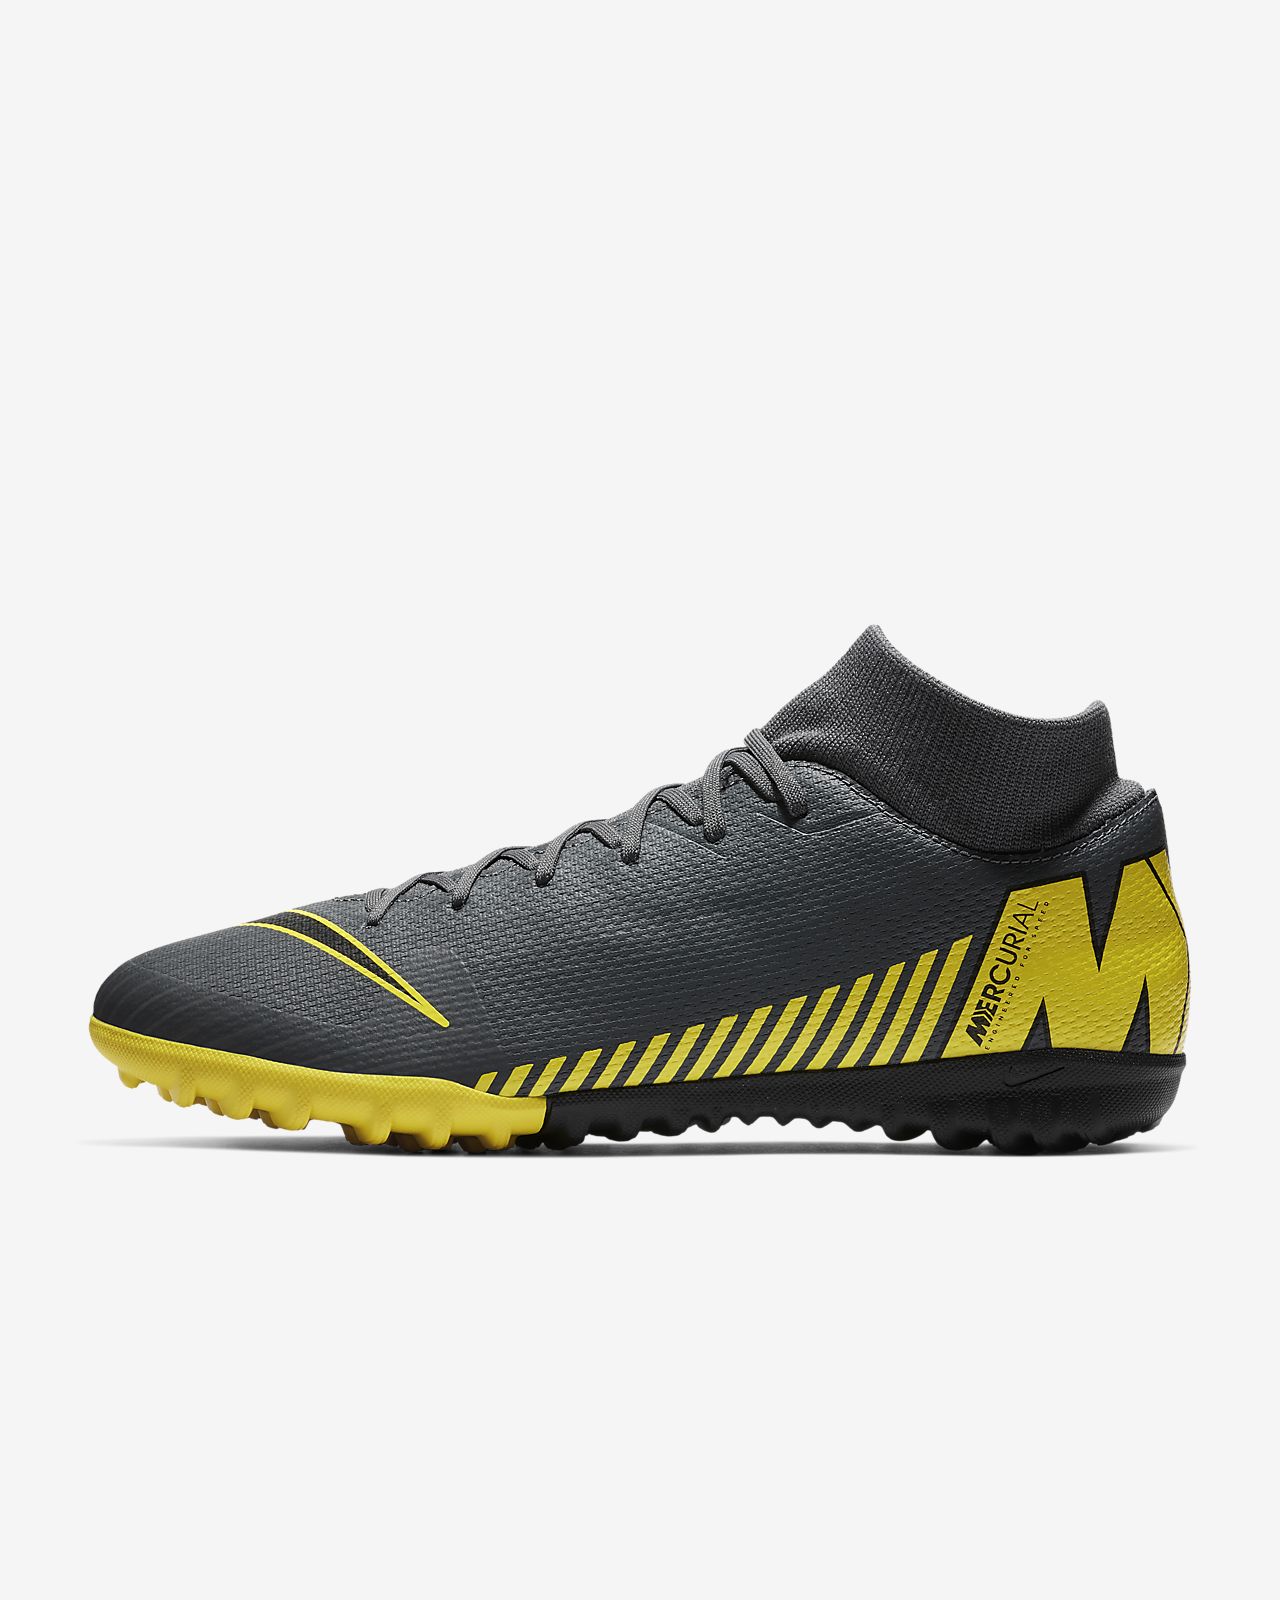 Compare Prices On Kids Nike Mercurial Superfly VI Black Lux.